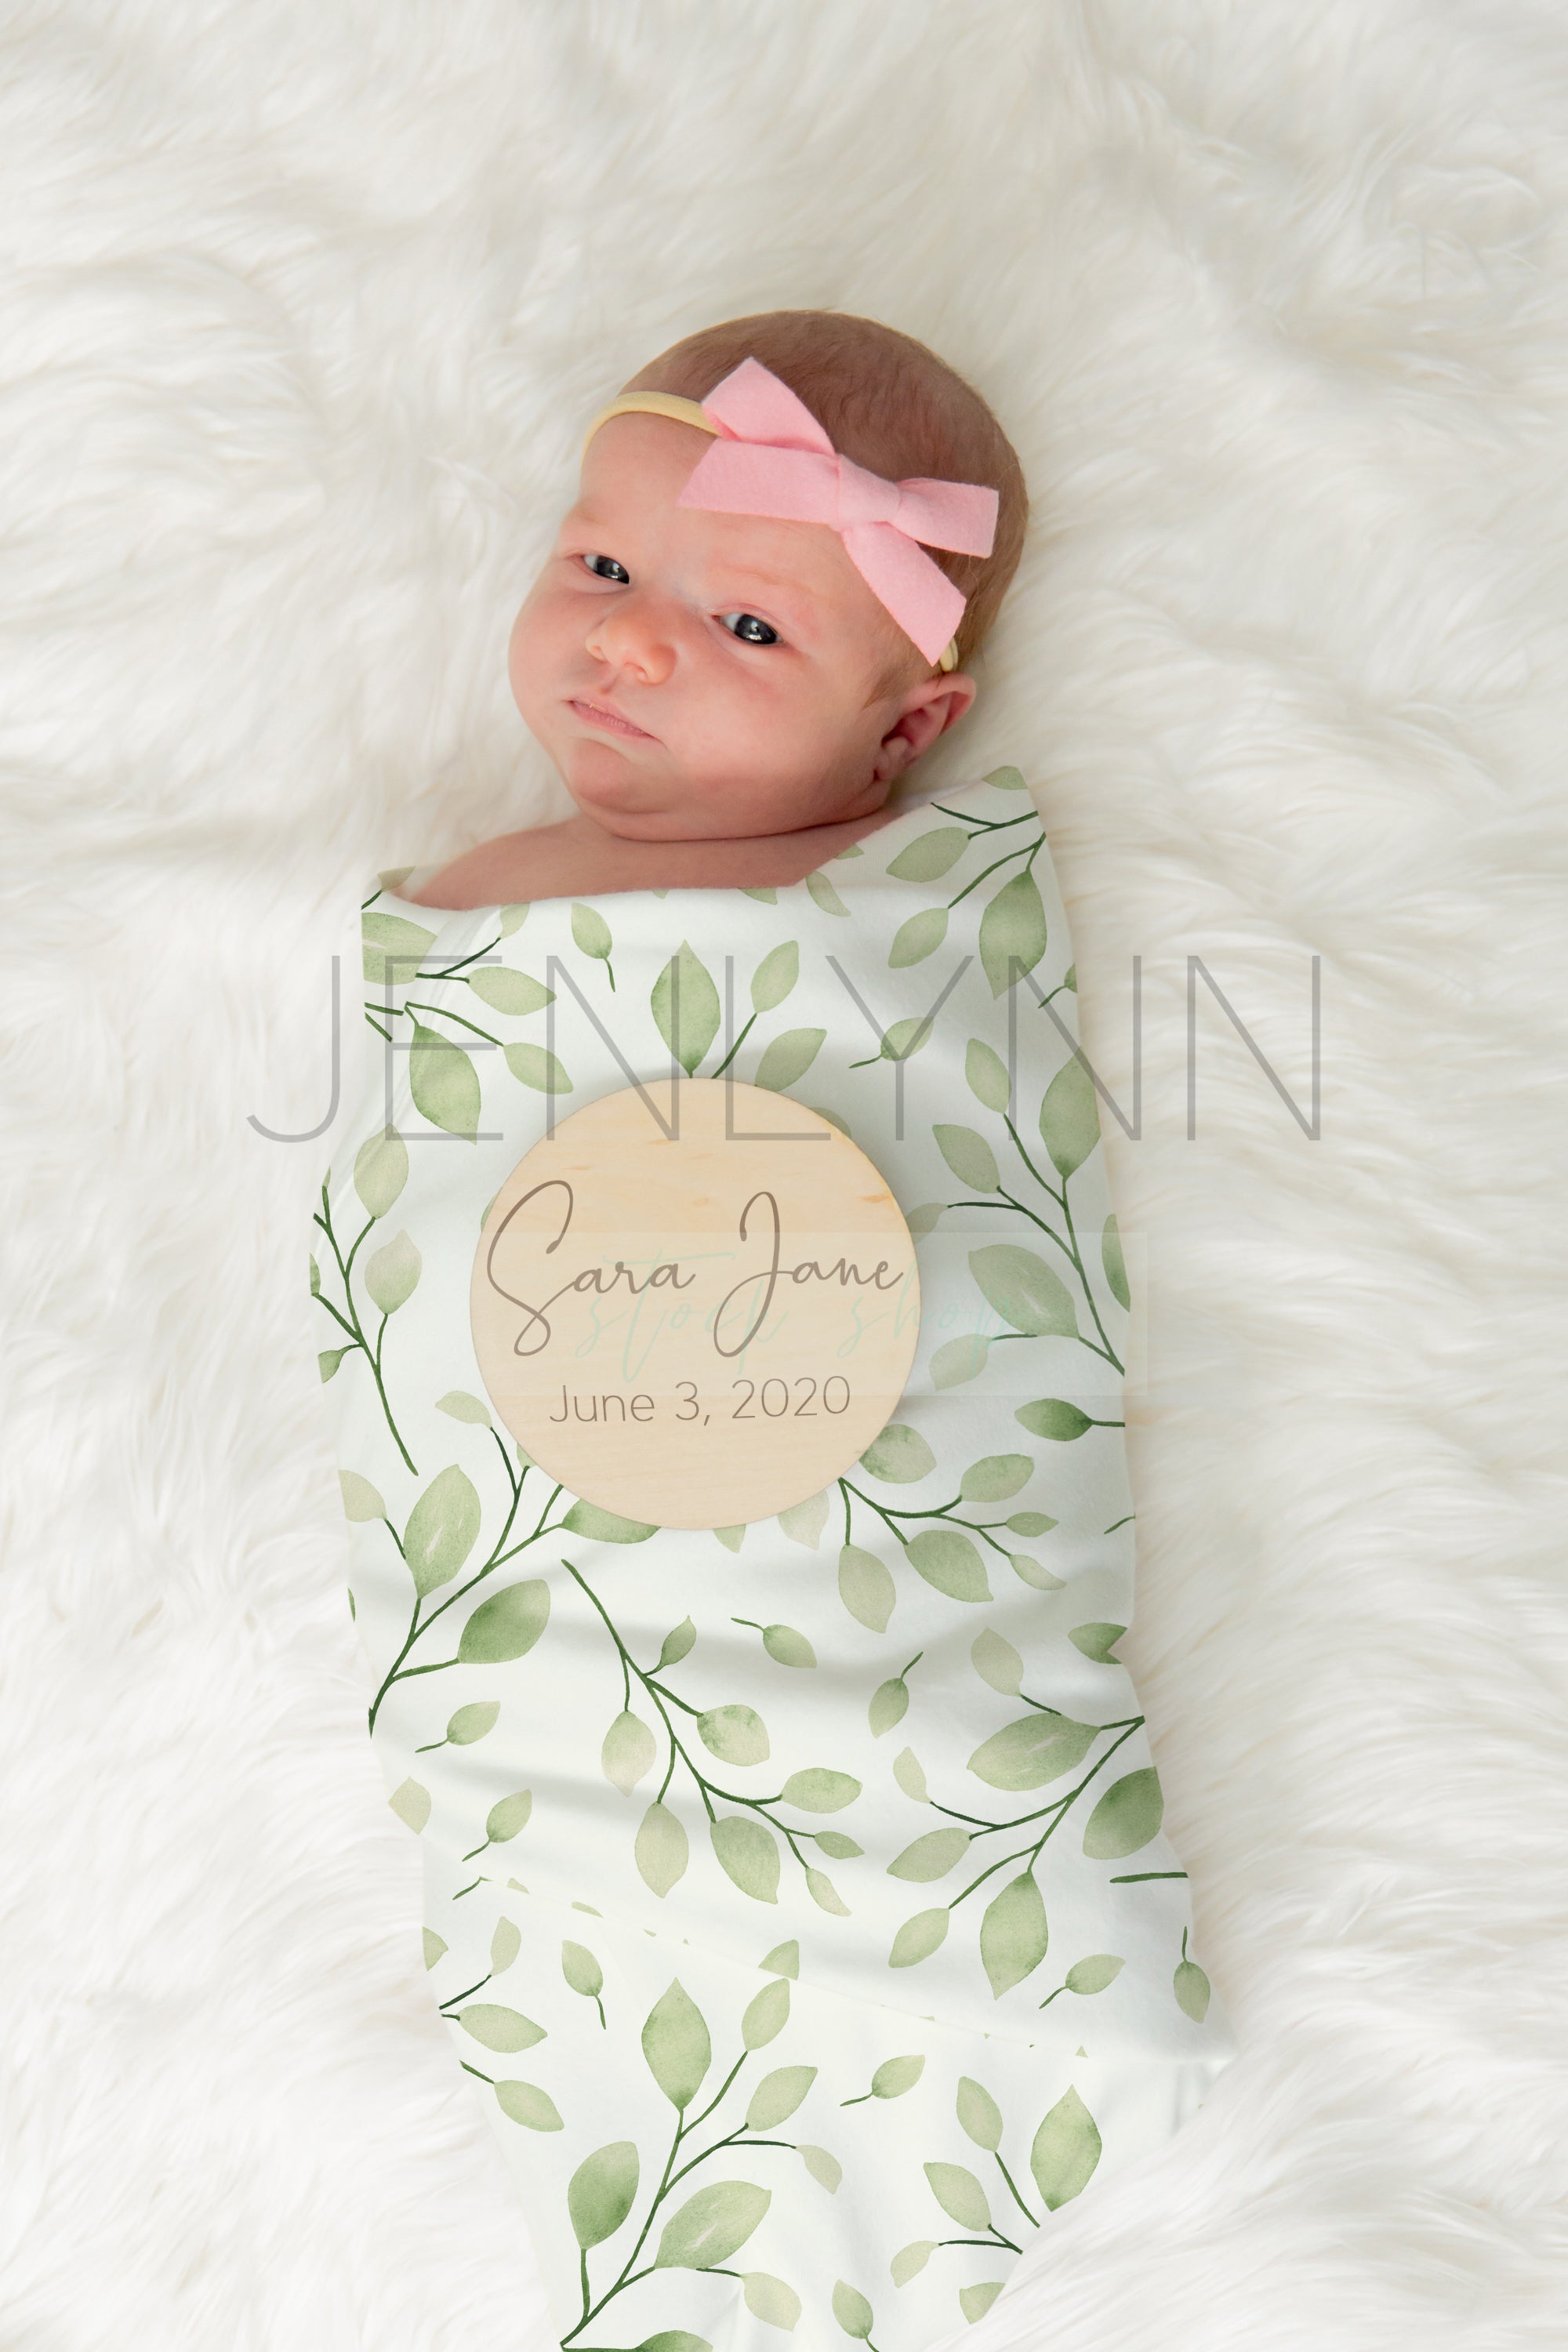 Jersey Baby Blanket Mockup with Wooden Stats sign #3 PSD